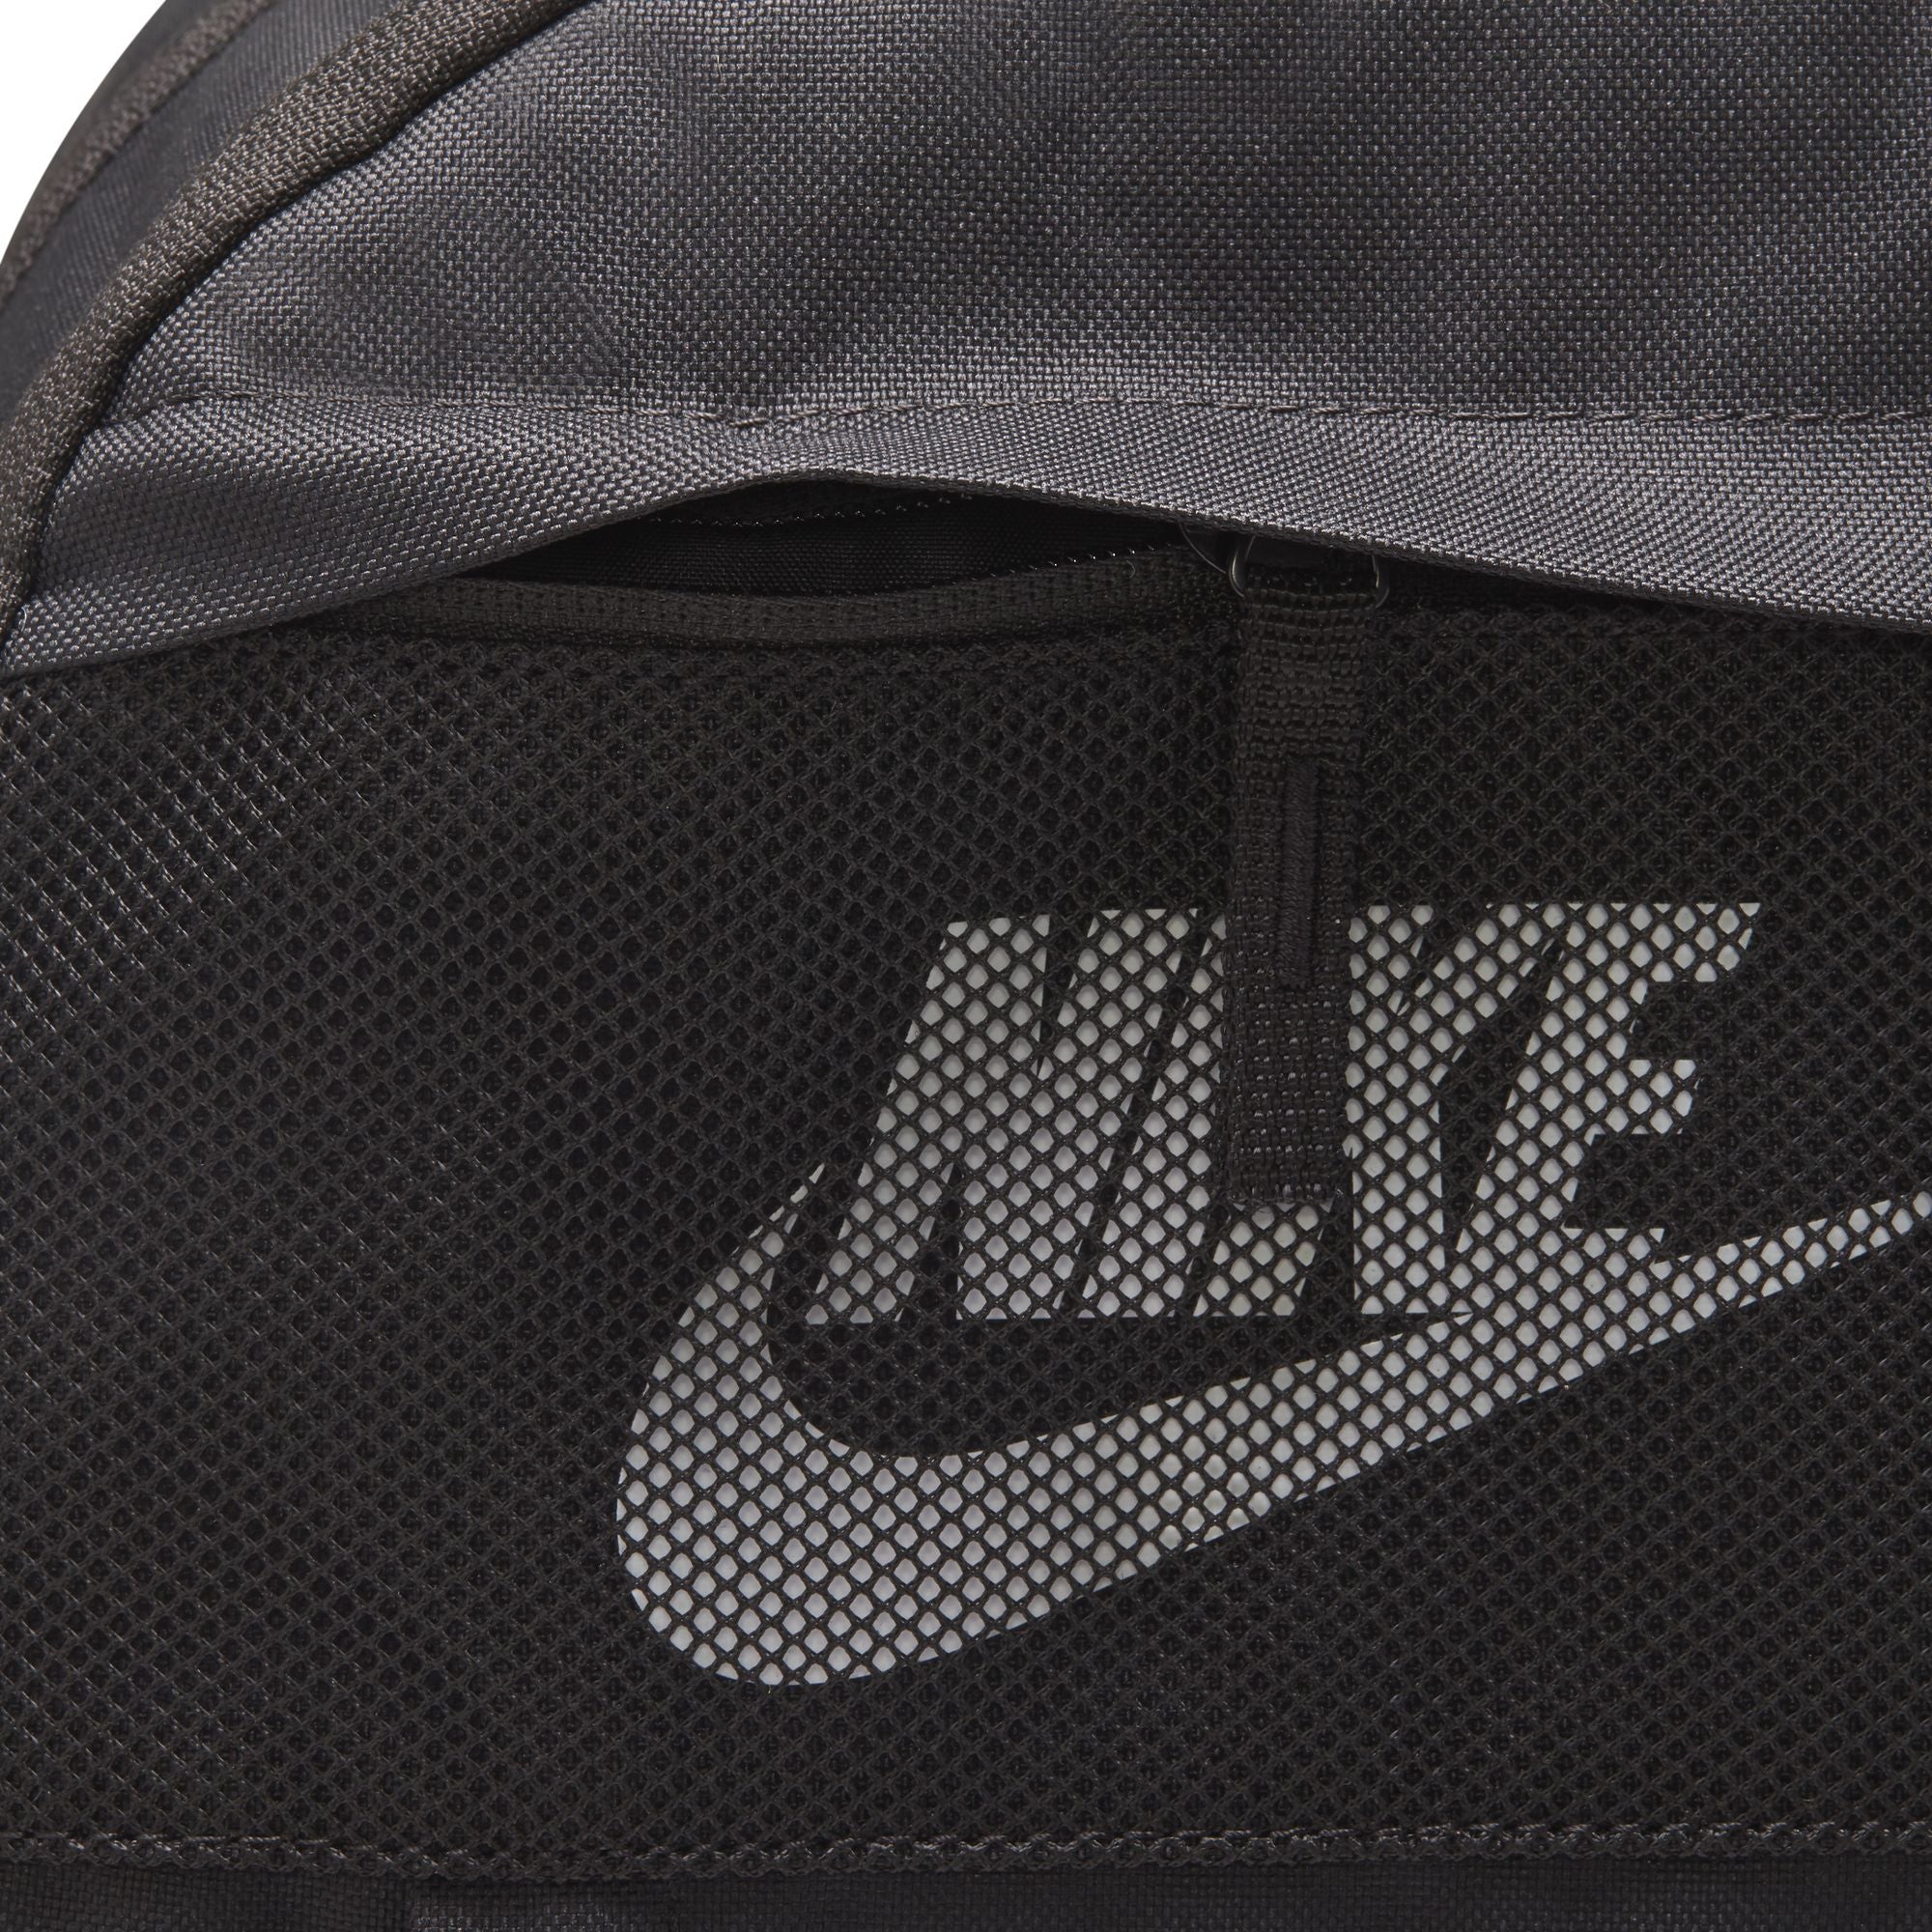 Black Nike back pack with two main pockets with zips, mesh pocket on front and white nike swoosh logo on front. Free uk shipping over £50